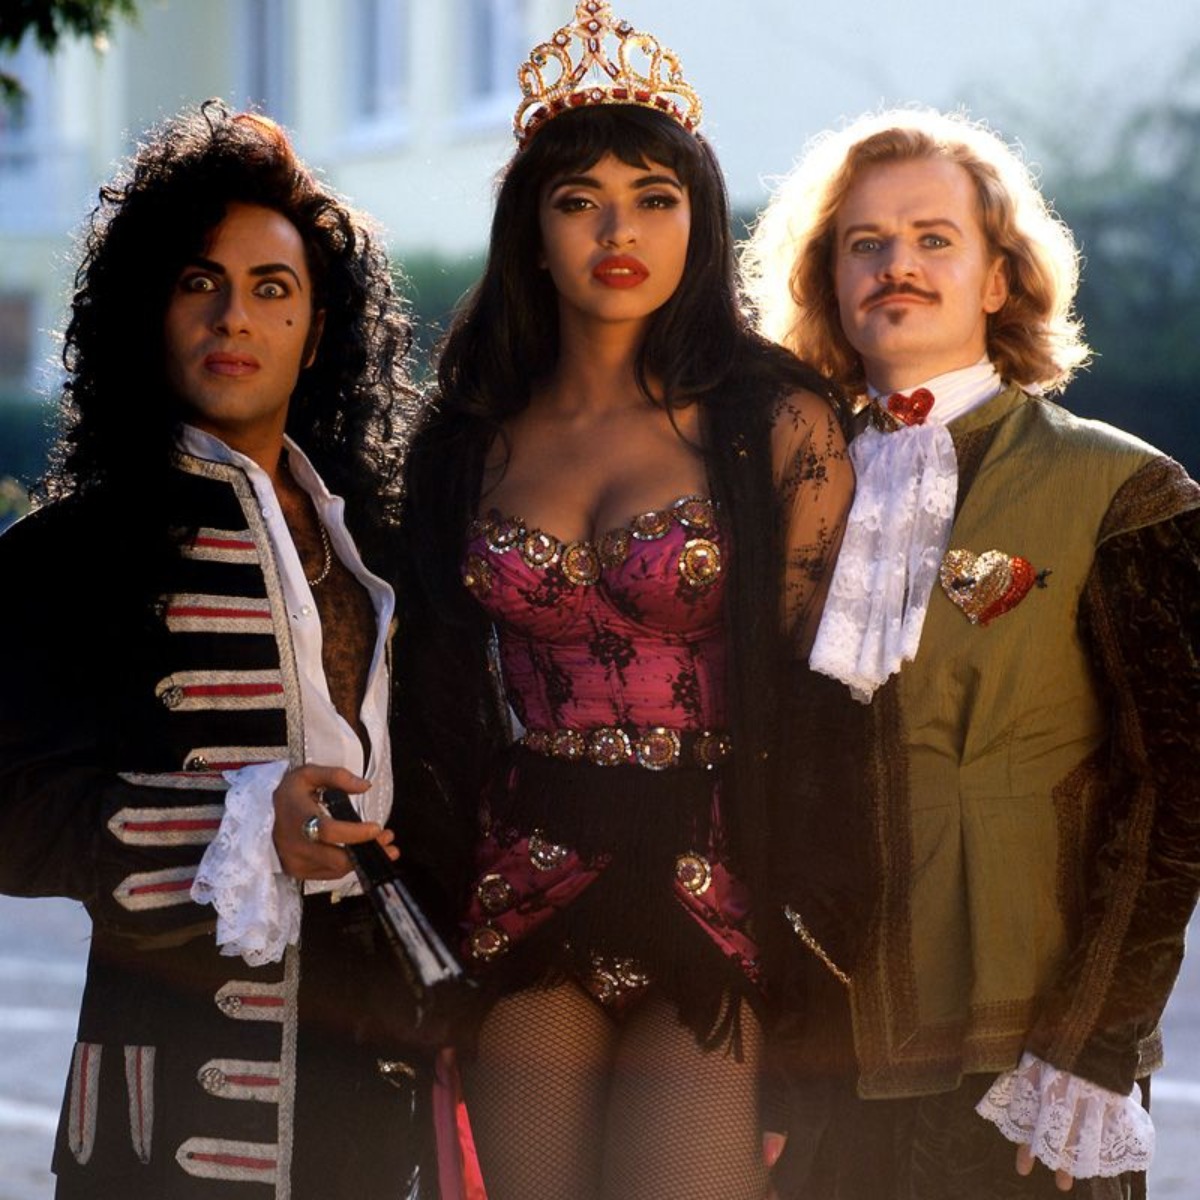 "Army of Lovers